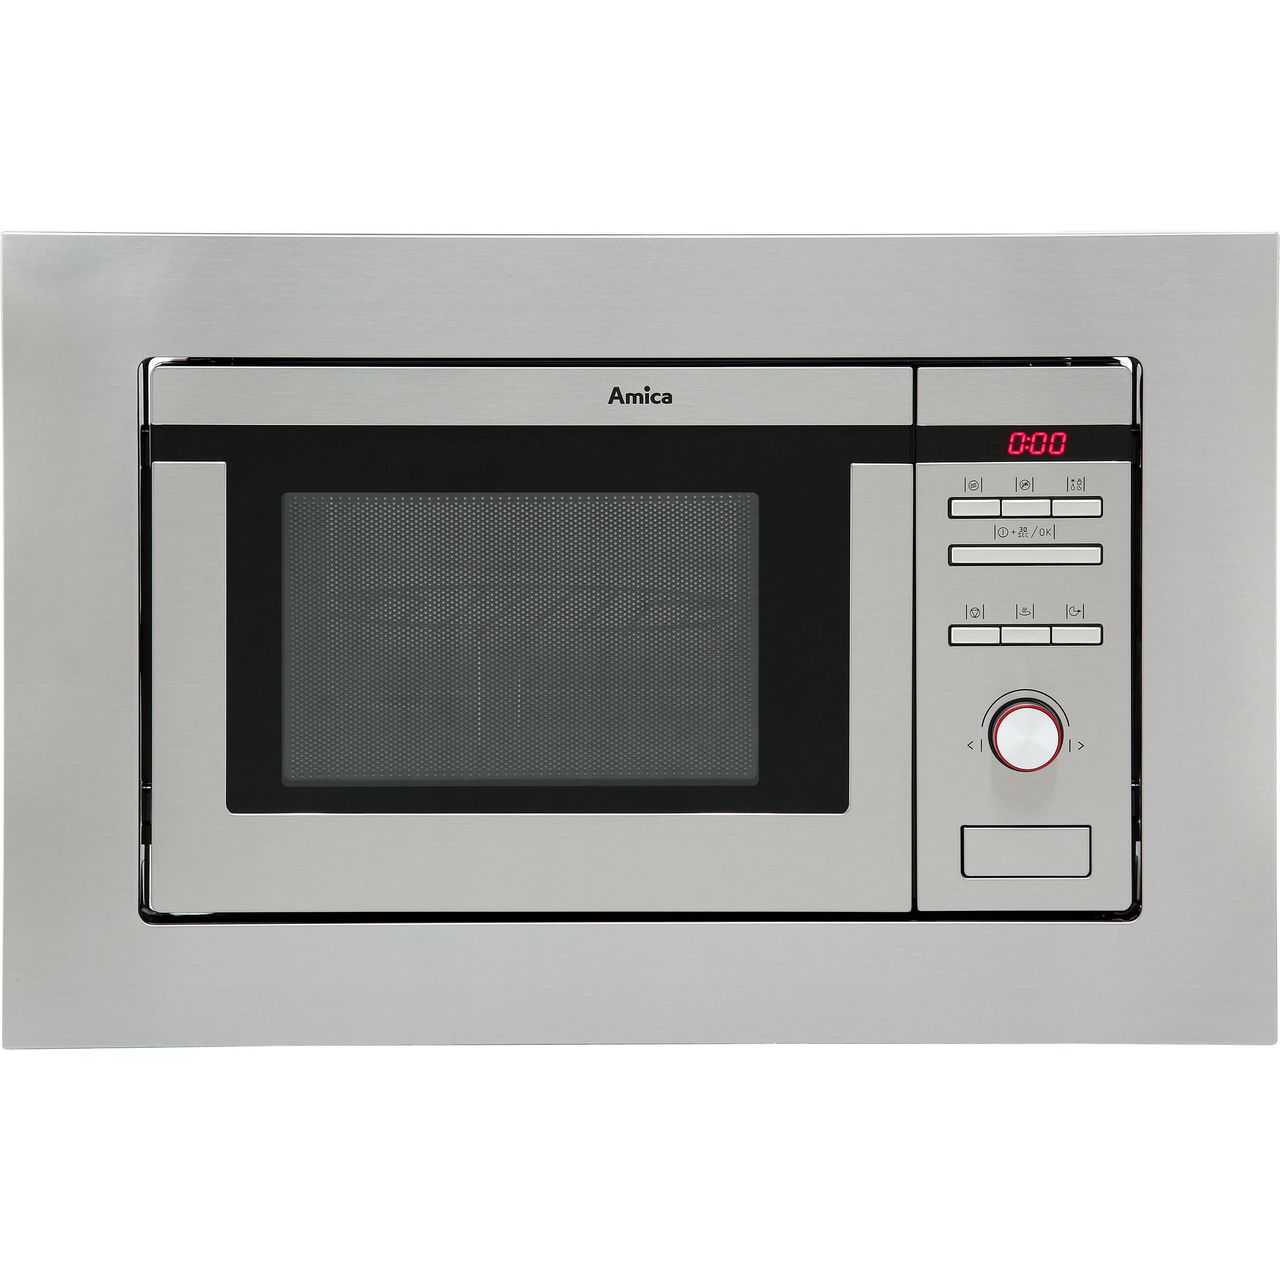 Amica AMM20G1BI Built In Microwave with Grill Review